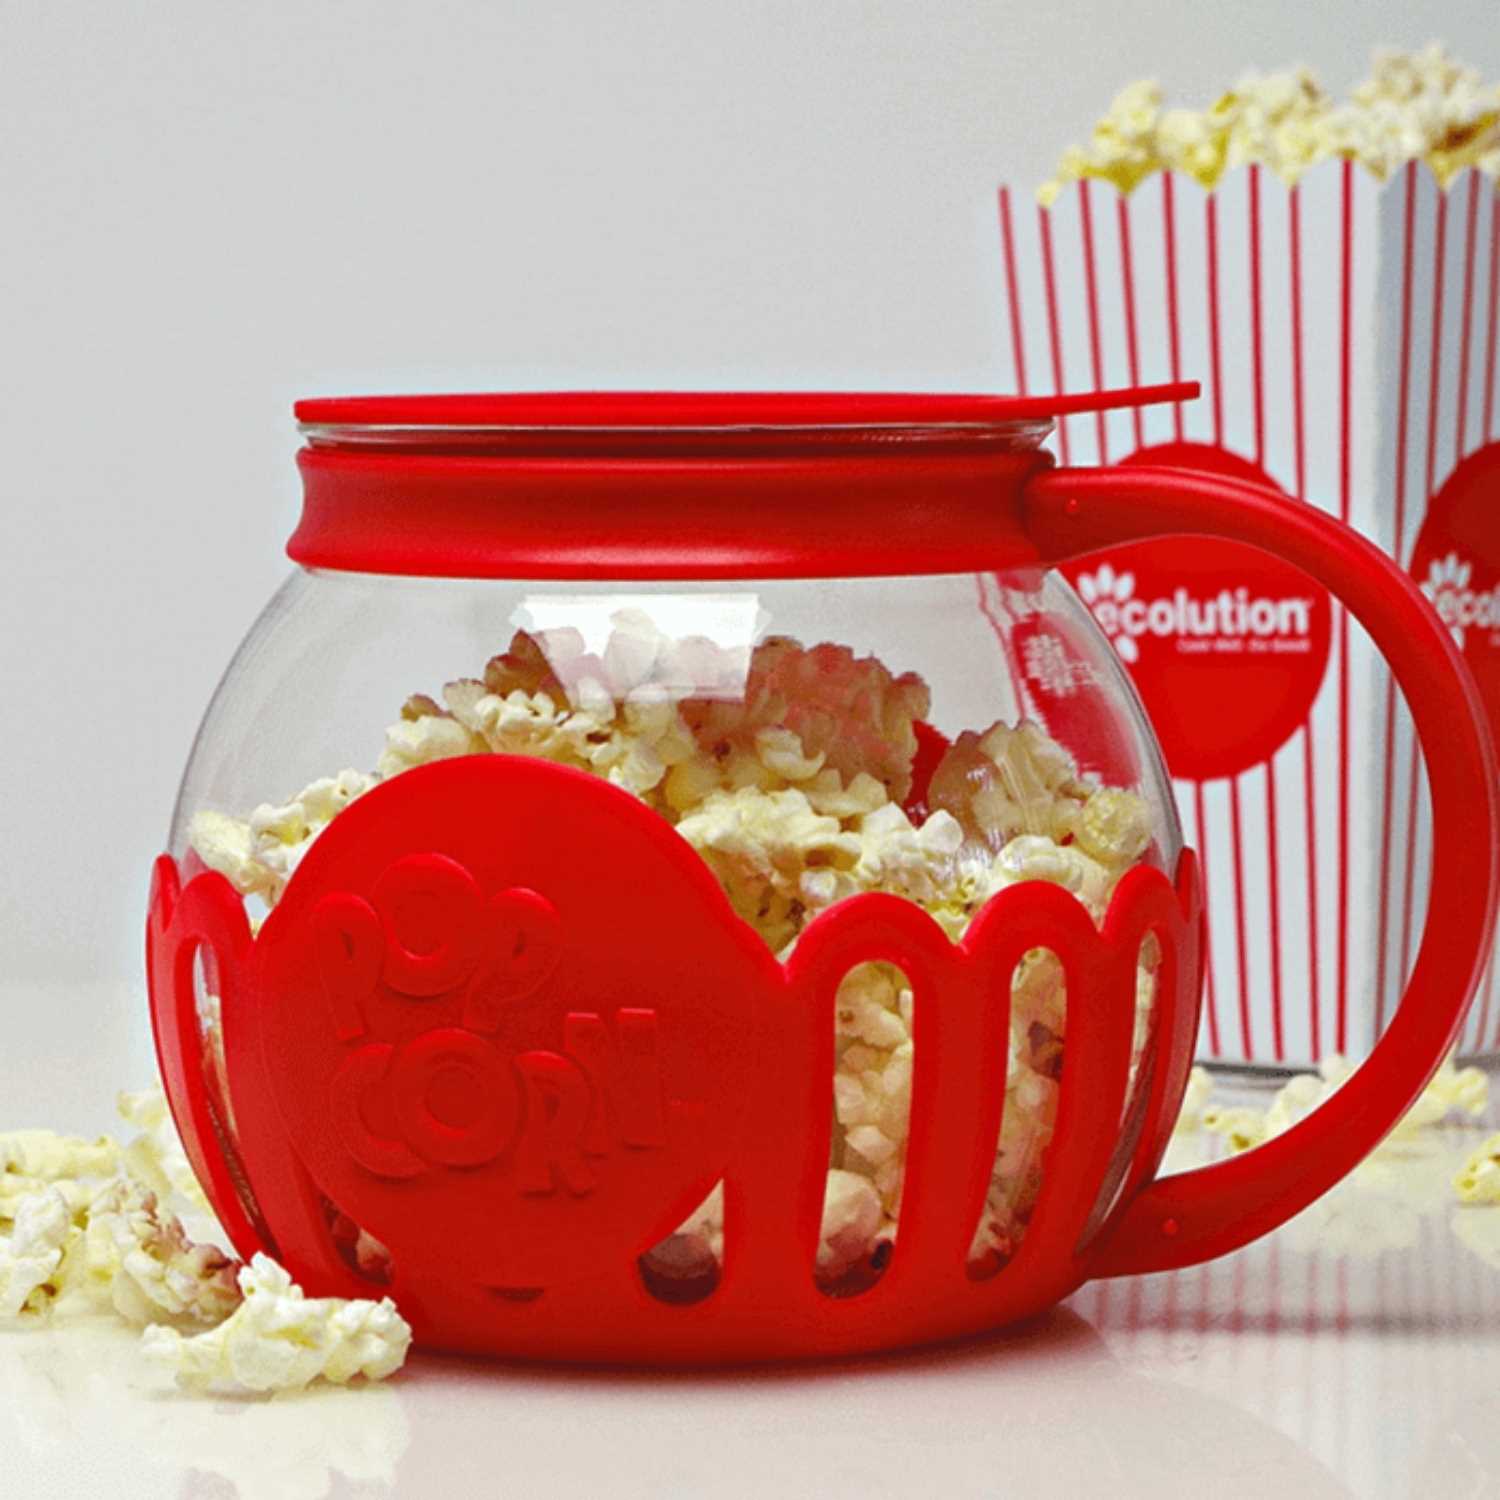 Micro-Pop Microwave Hot Air Popcorn Maker Side View - Creative Anniversary Presents For Him